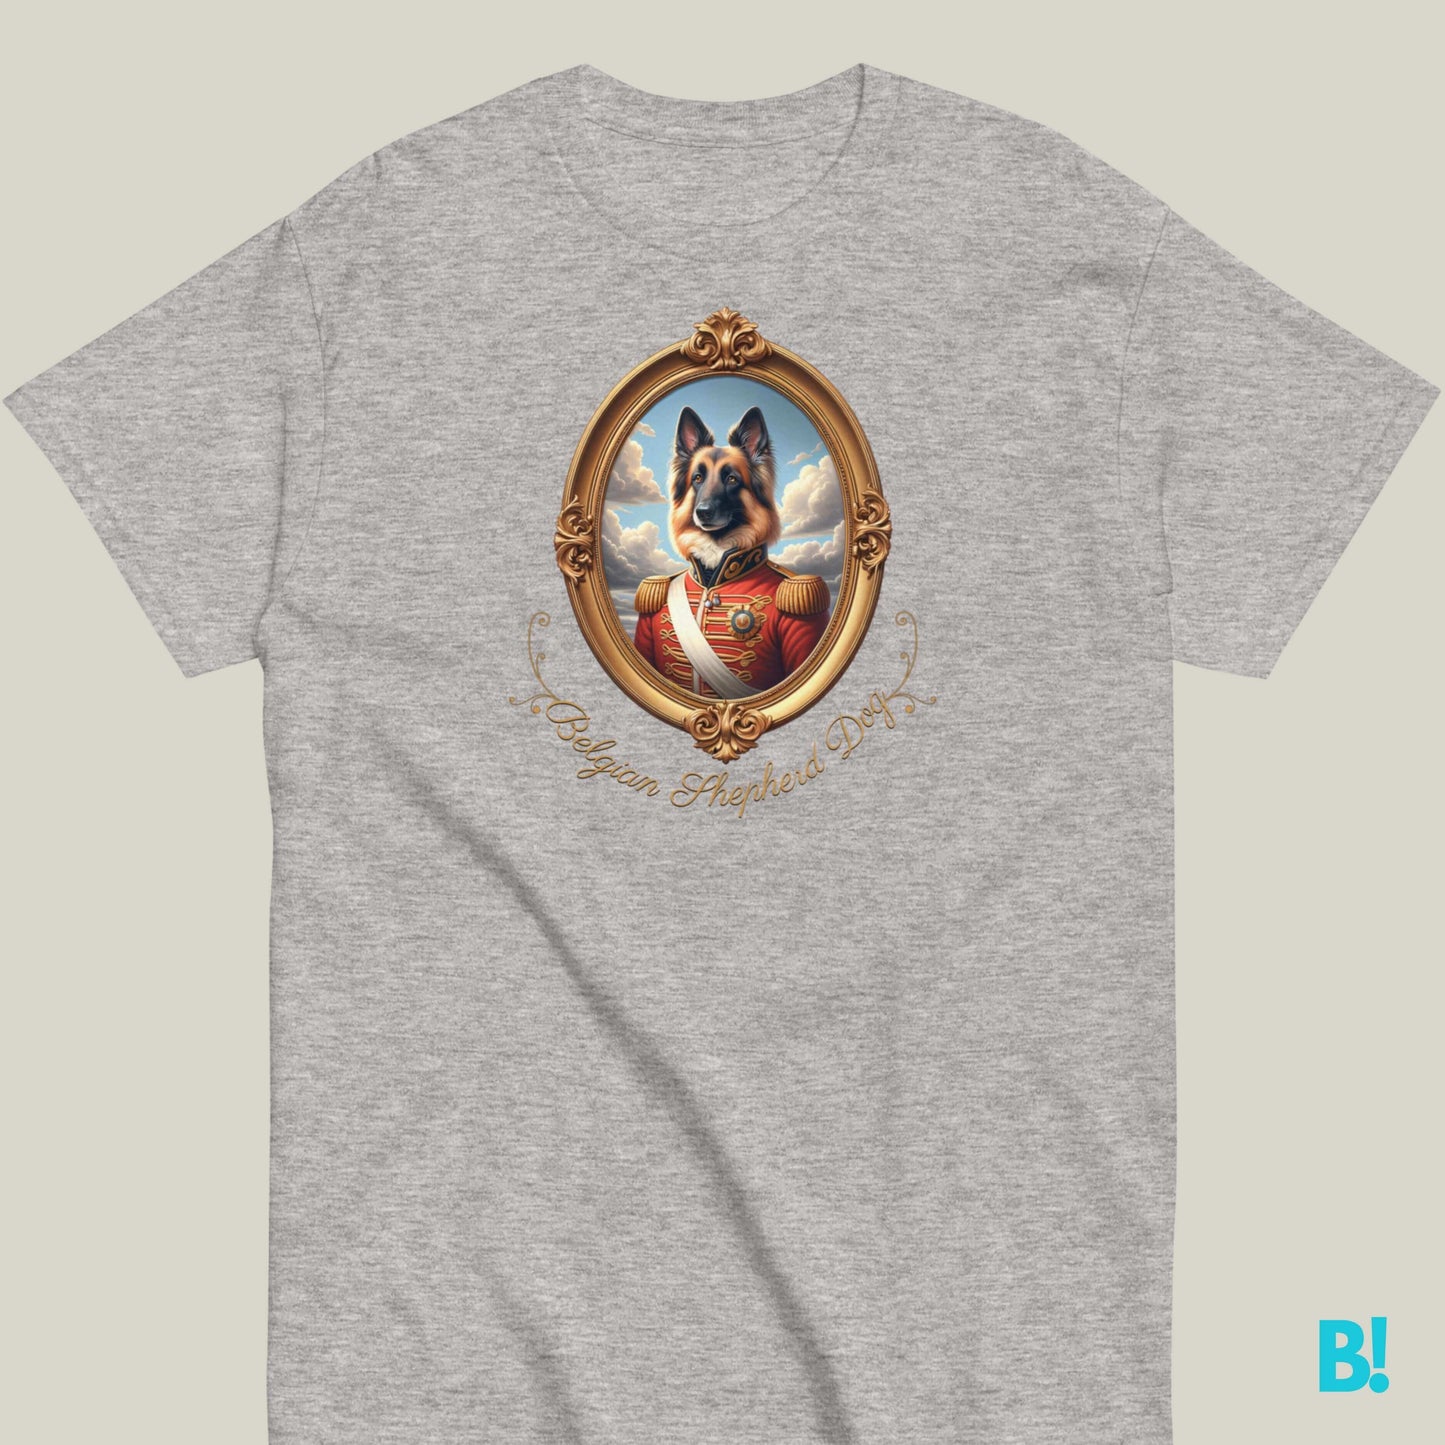 Belgian Shepherd Portrait Tee - Elegance & Comfort Don this luxurious 100% cotton Belgian Shepherd tee in 7 royal shades. Smart design for the smart breed enthusiast. Perfect fit guaranteed. €29.50 B!NKY Comfywear